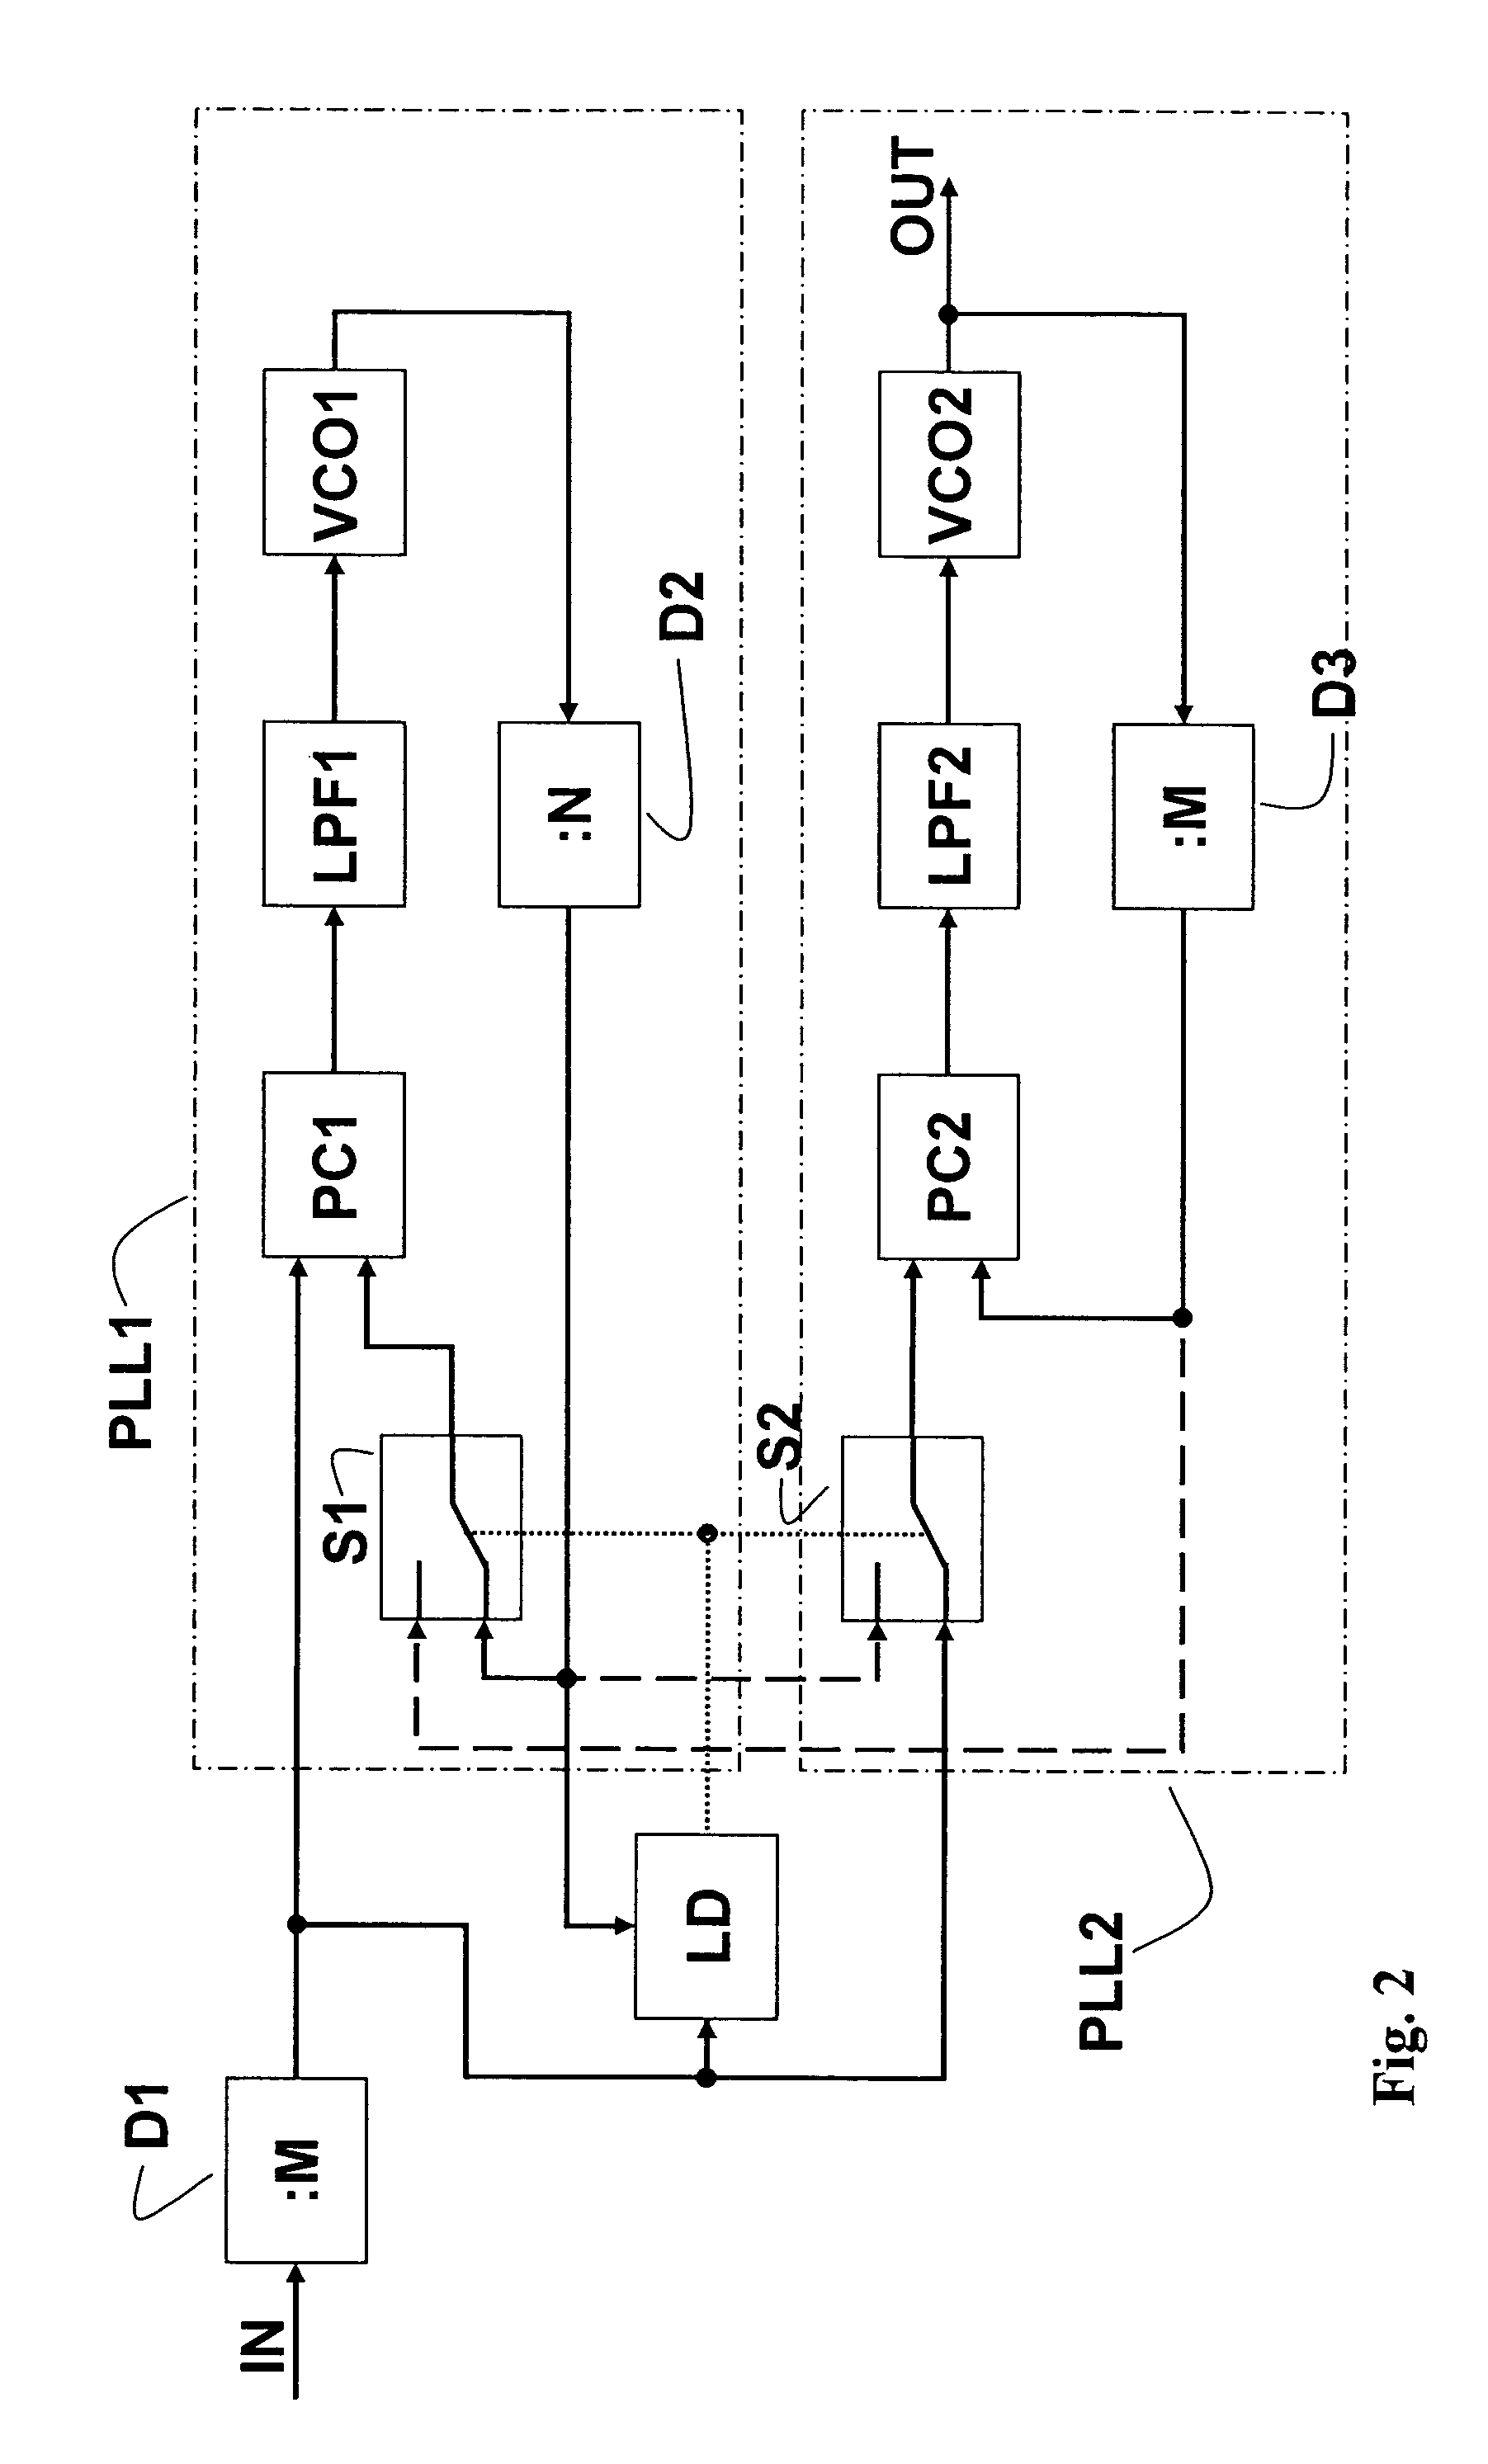 Switchable PLL circuit